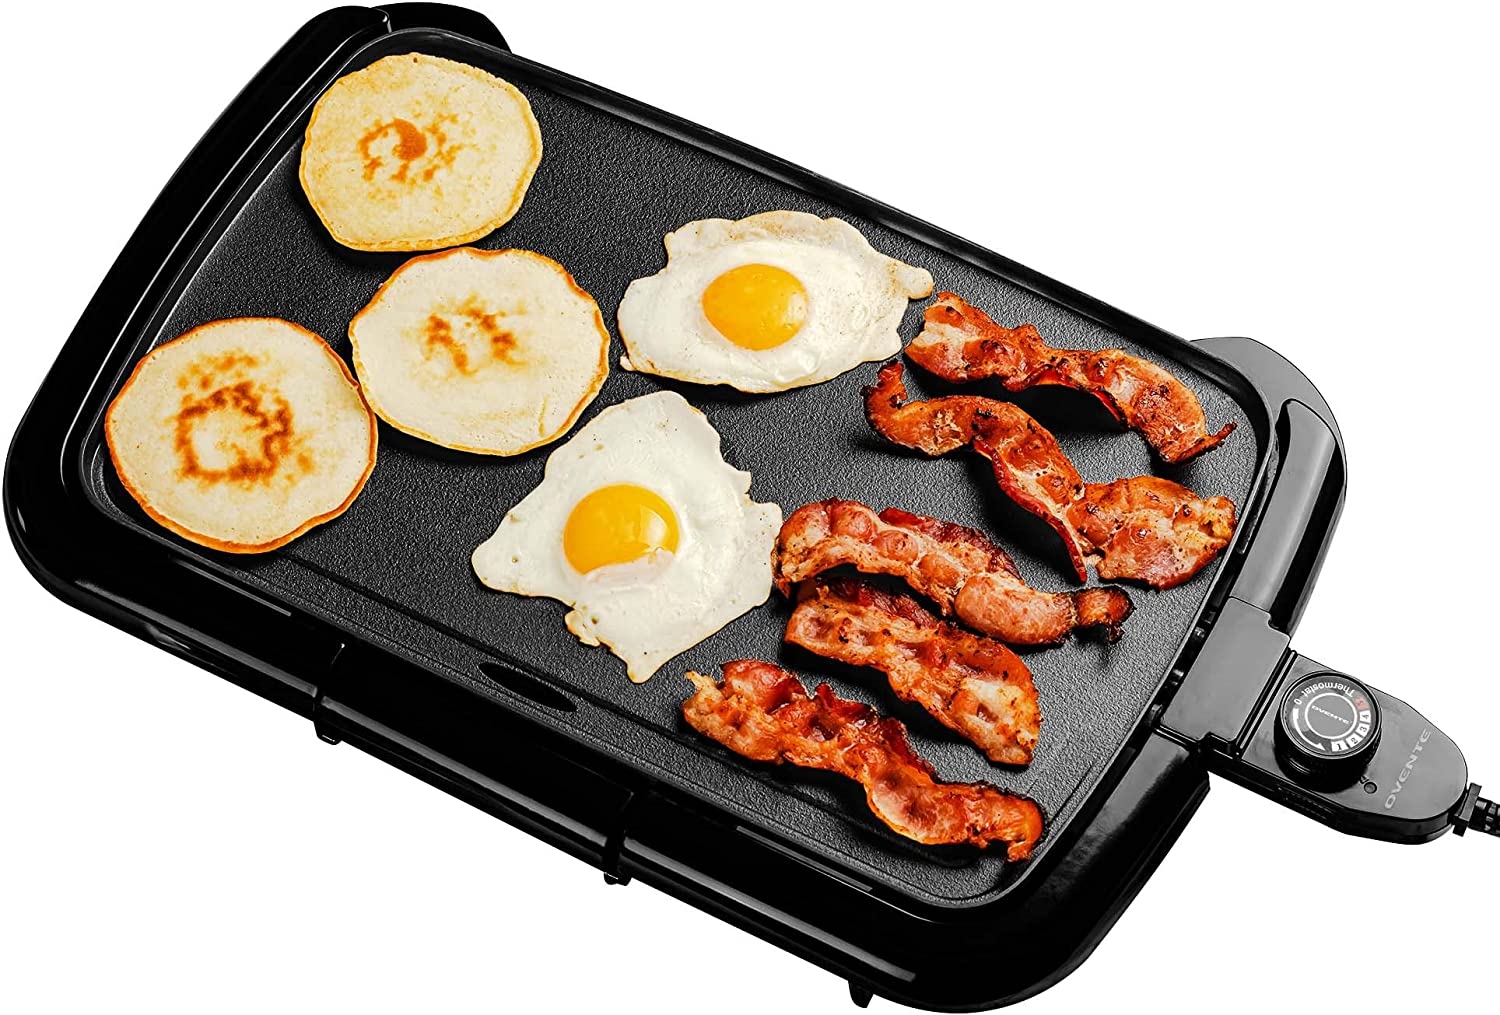 Ovente Electric Indoor Kitchen Griddle 16 x 10 Inch Nonstick Flat Cast Iron Grilling Plate, 1200 Watt with Temperature Control